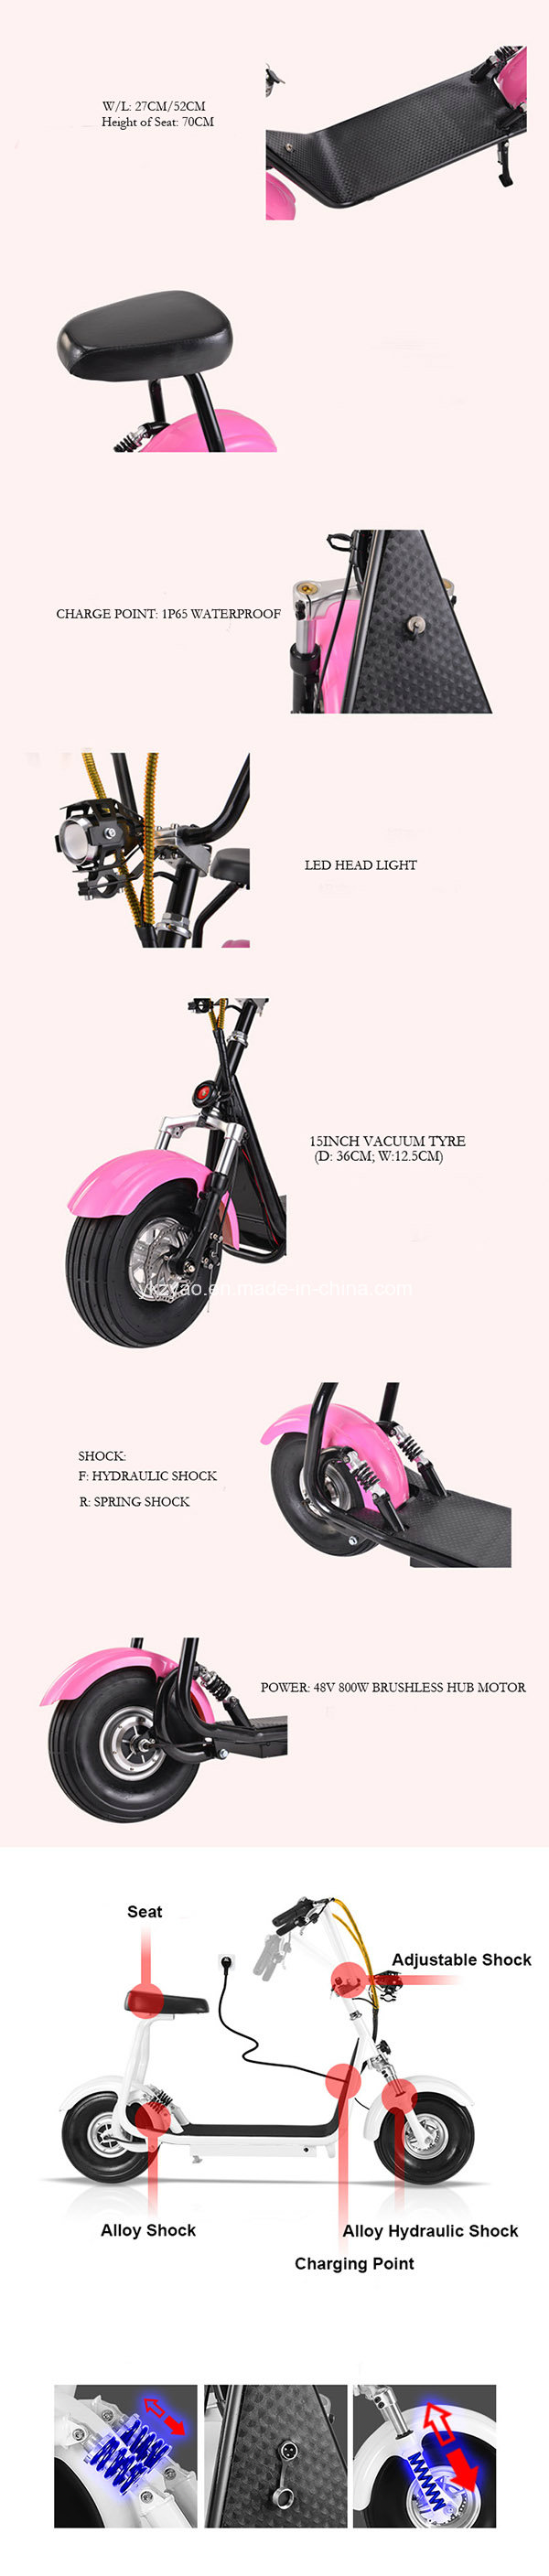 2016 Most Fashionable Smart Harley Electric Scooter Citycoco Scooter Two Big Wheels for Cool Sports Small Harley Scooter